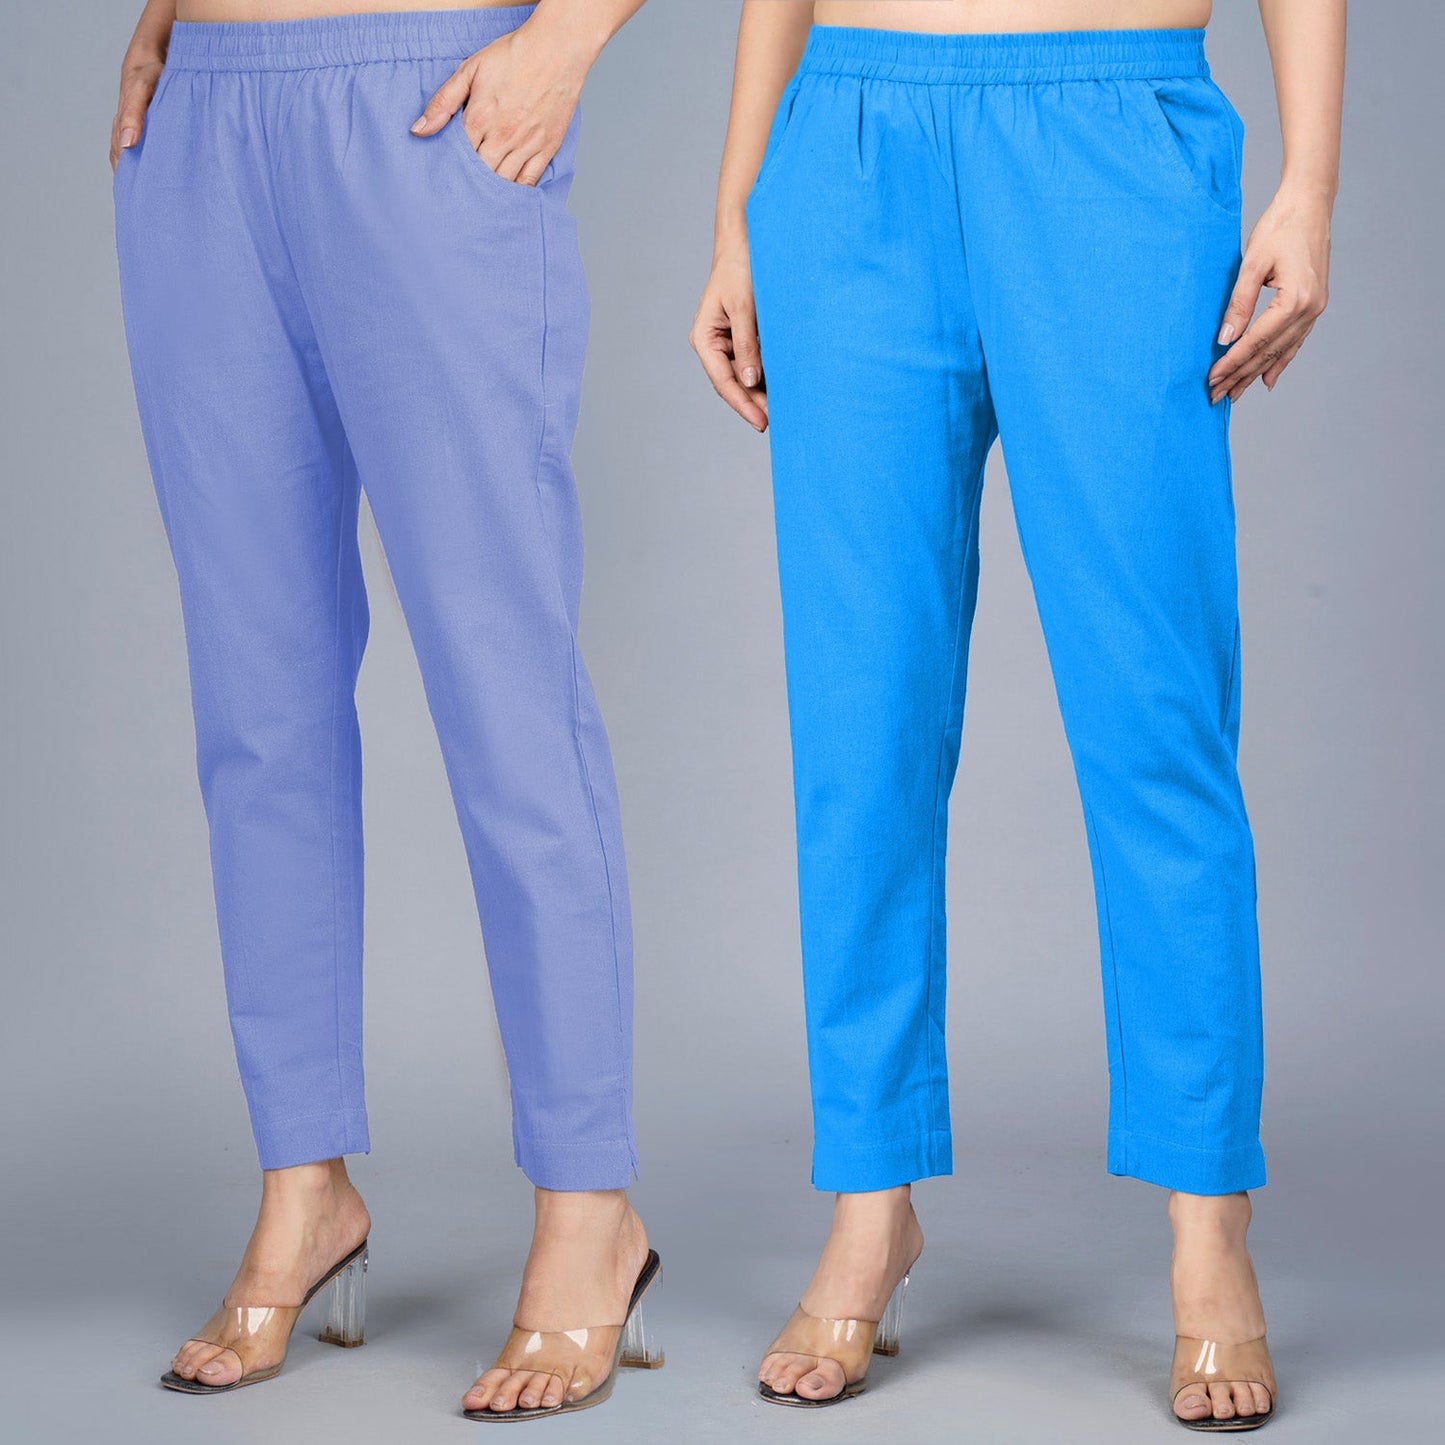 Pack Of 2 Womens Regular Fit Denim Blue And Sky Blue Fully Elastic Waistband Cotton Trouser